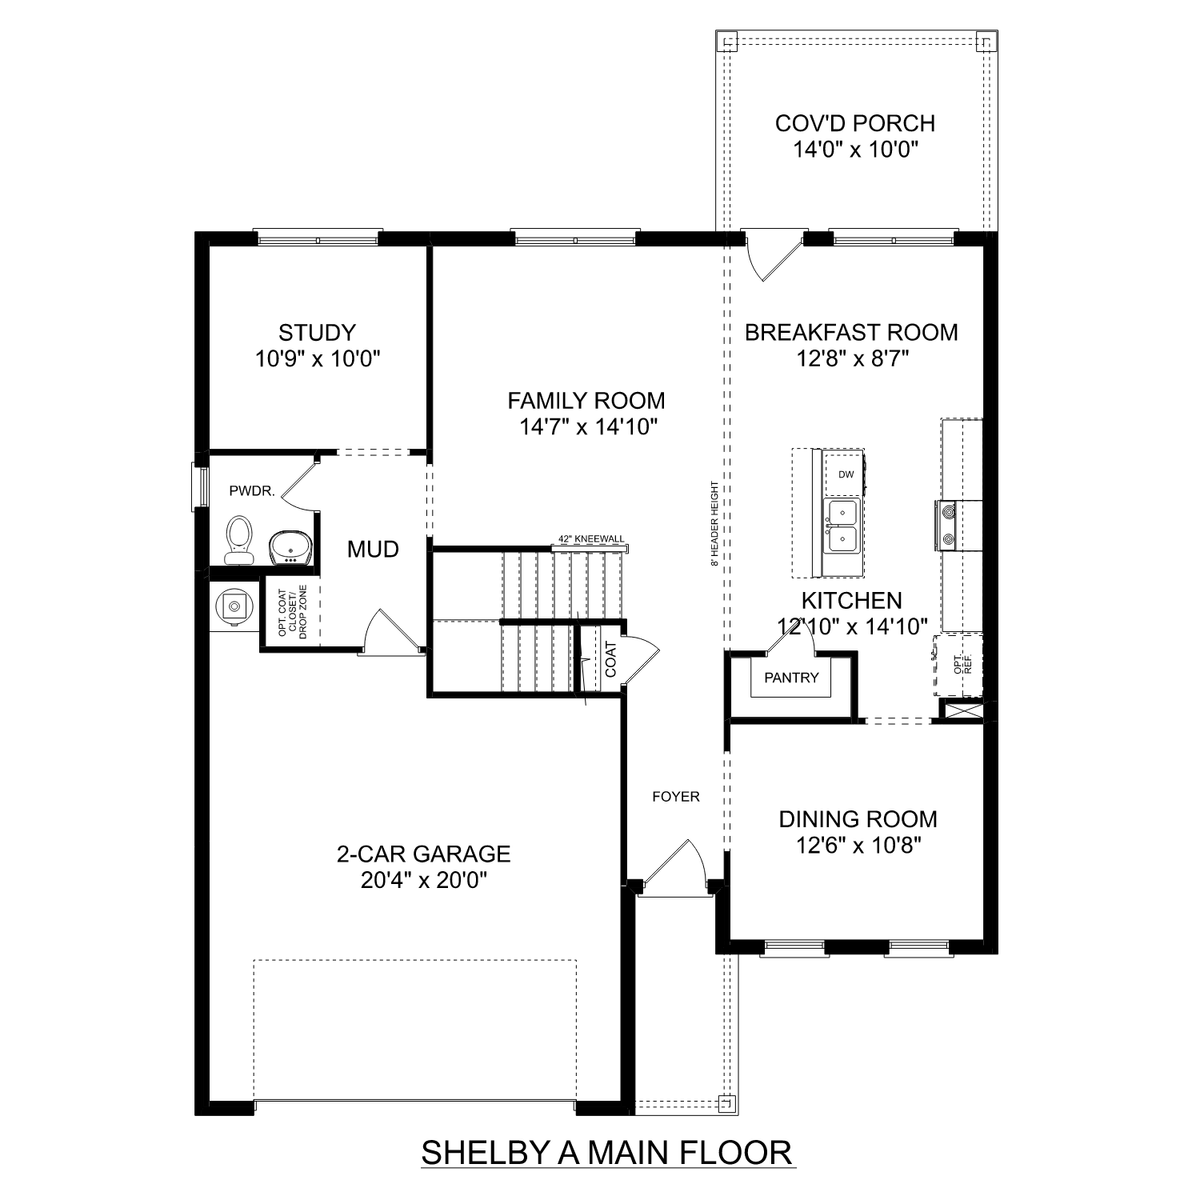 1 - The Shelby A floor plan layout for 9222 Current Way in Davidson Homes' Watts Glen community.